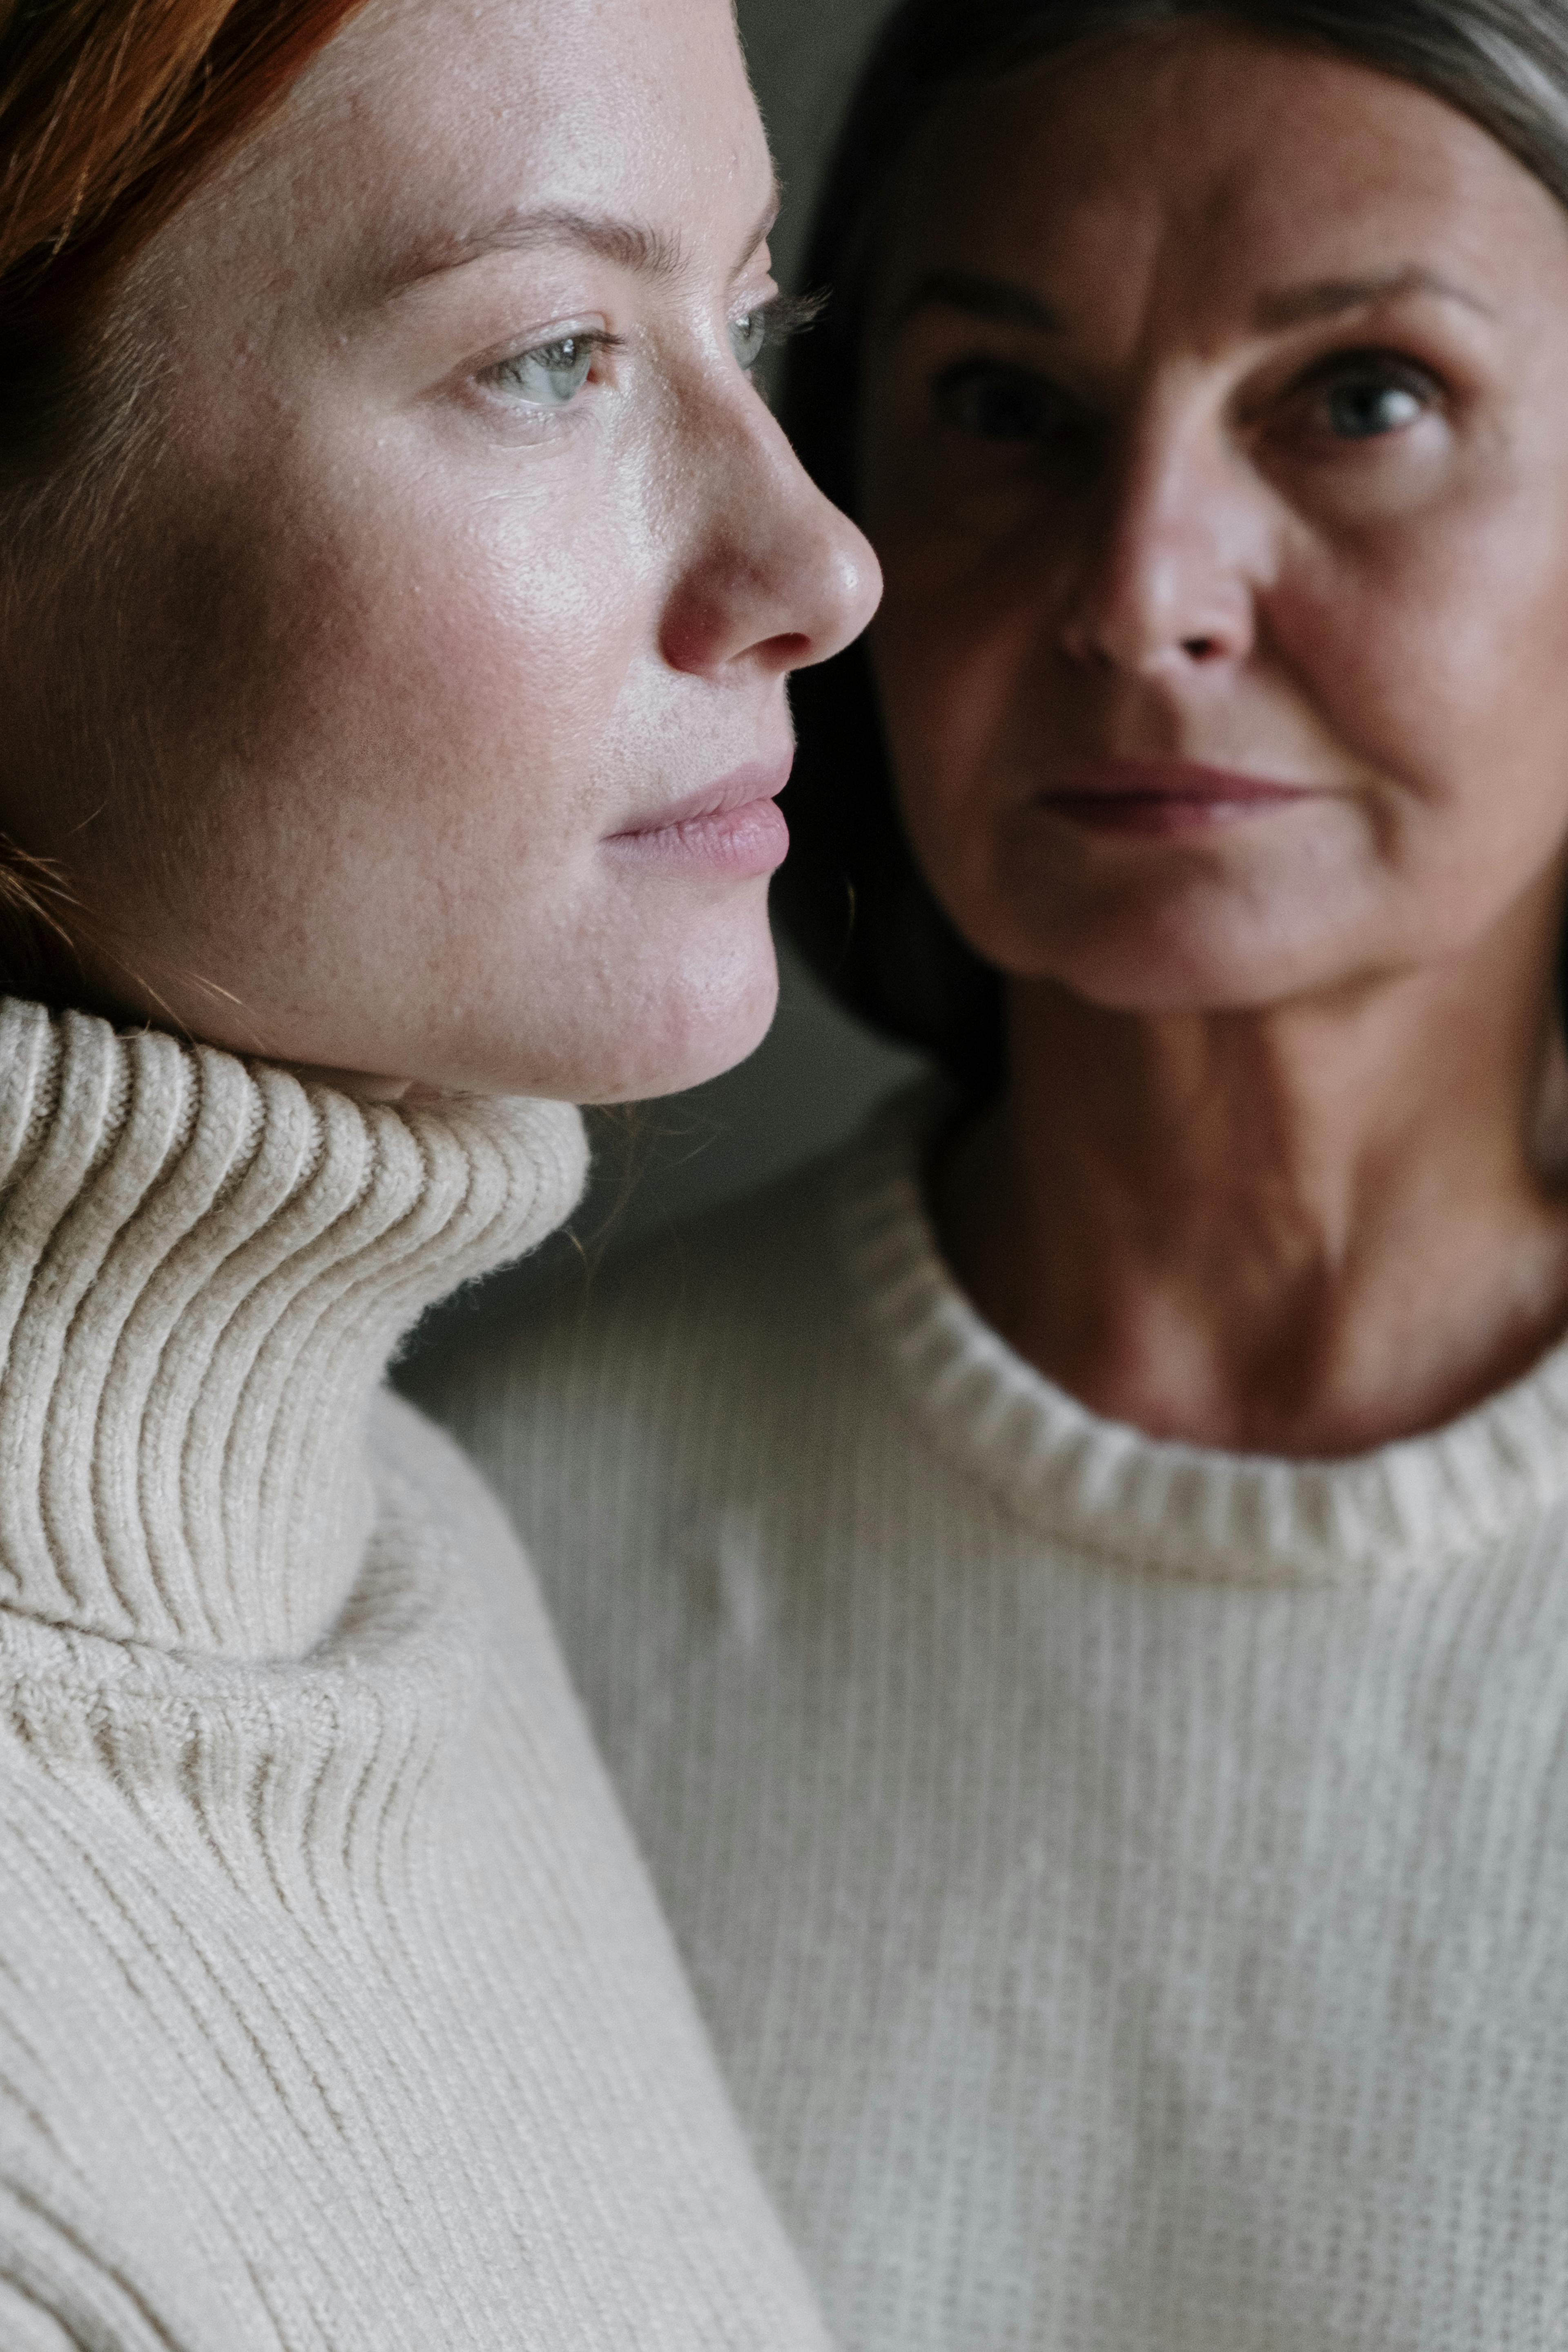 A mother and daughter looking upset | Source: Pexels